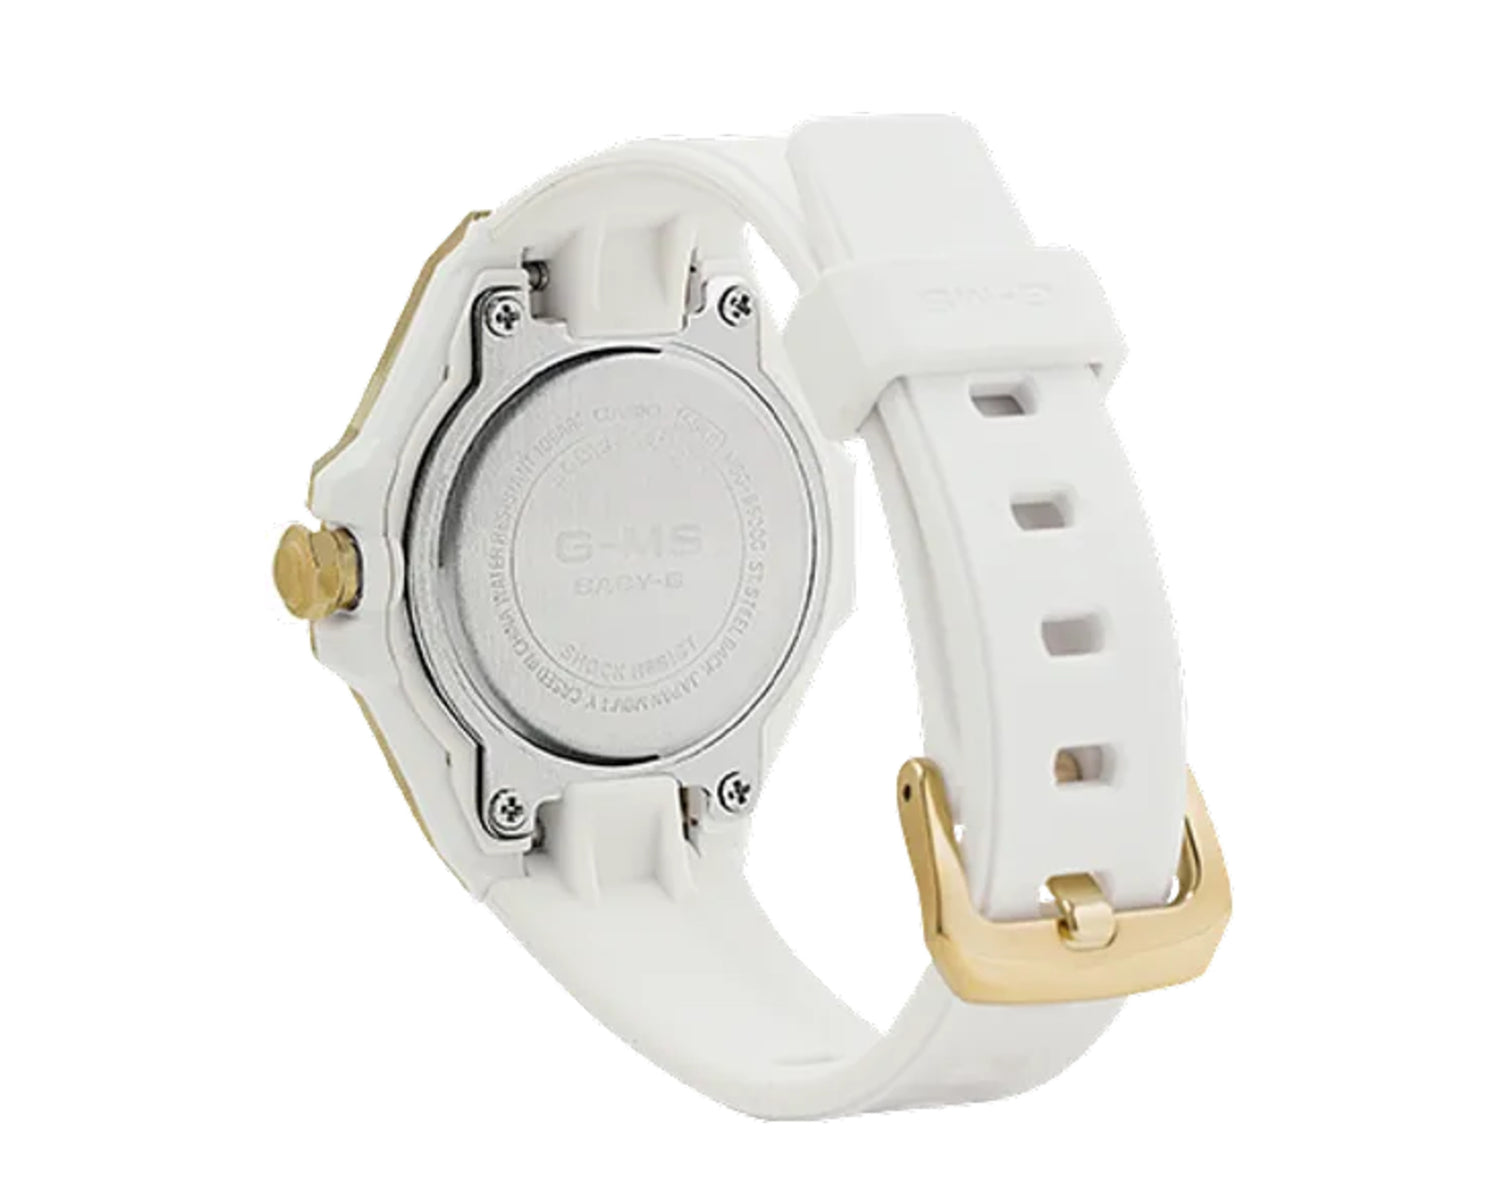 Casio G-Shock MSGS500 G-MS Metal and Resin Women's Watch